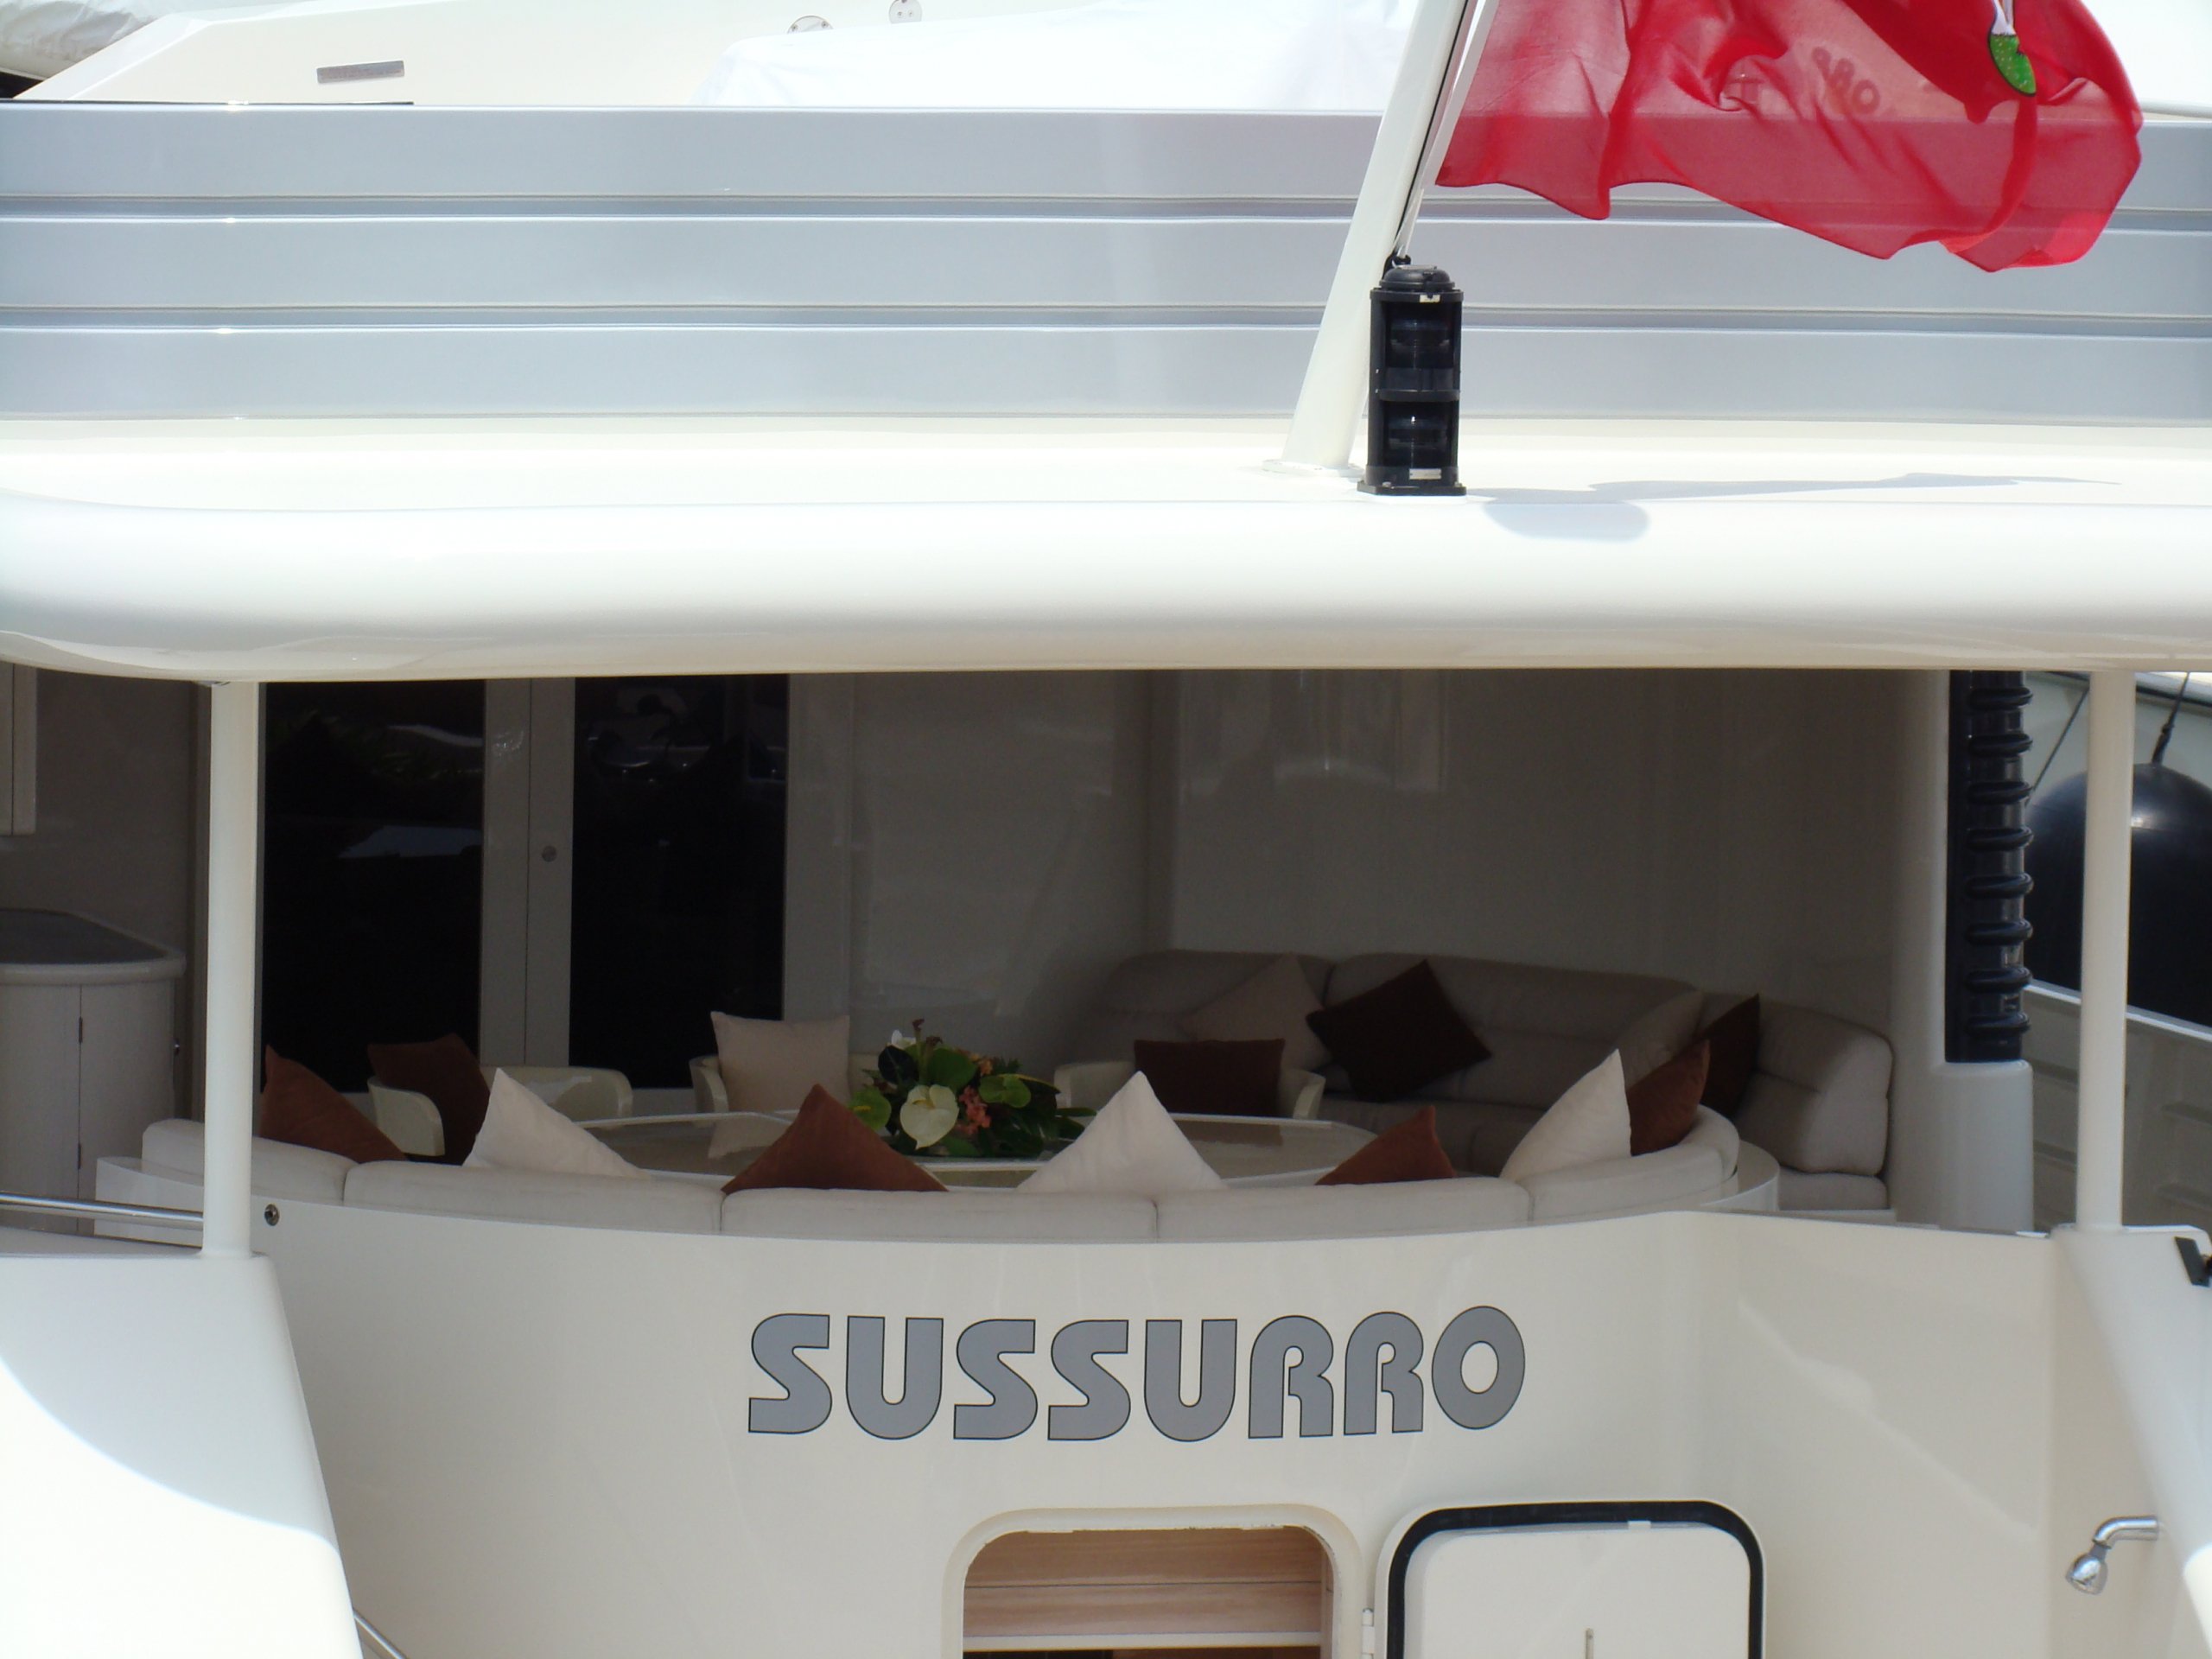 Sussurro Yacht • Feadship • 1998 • News